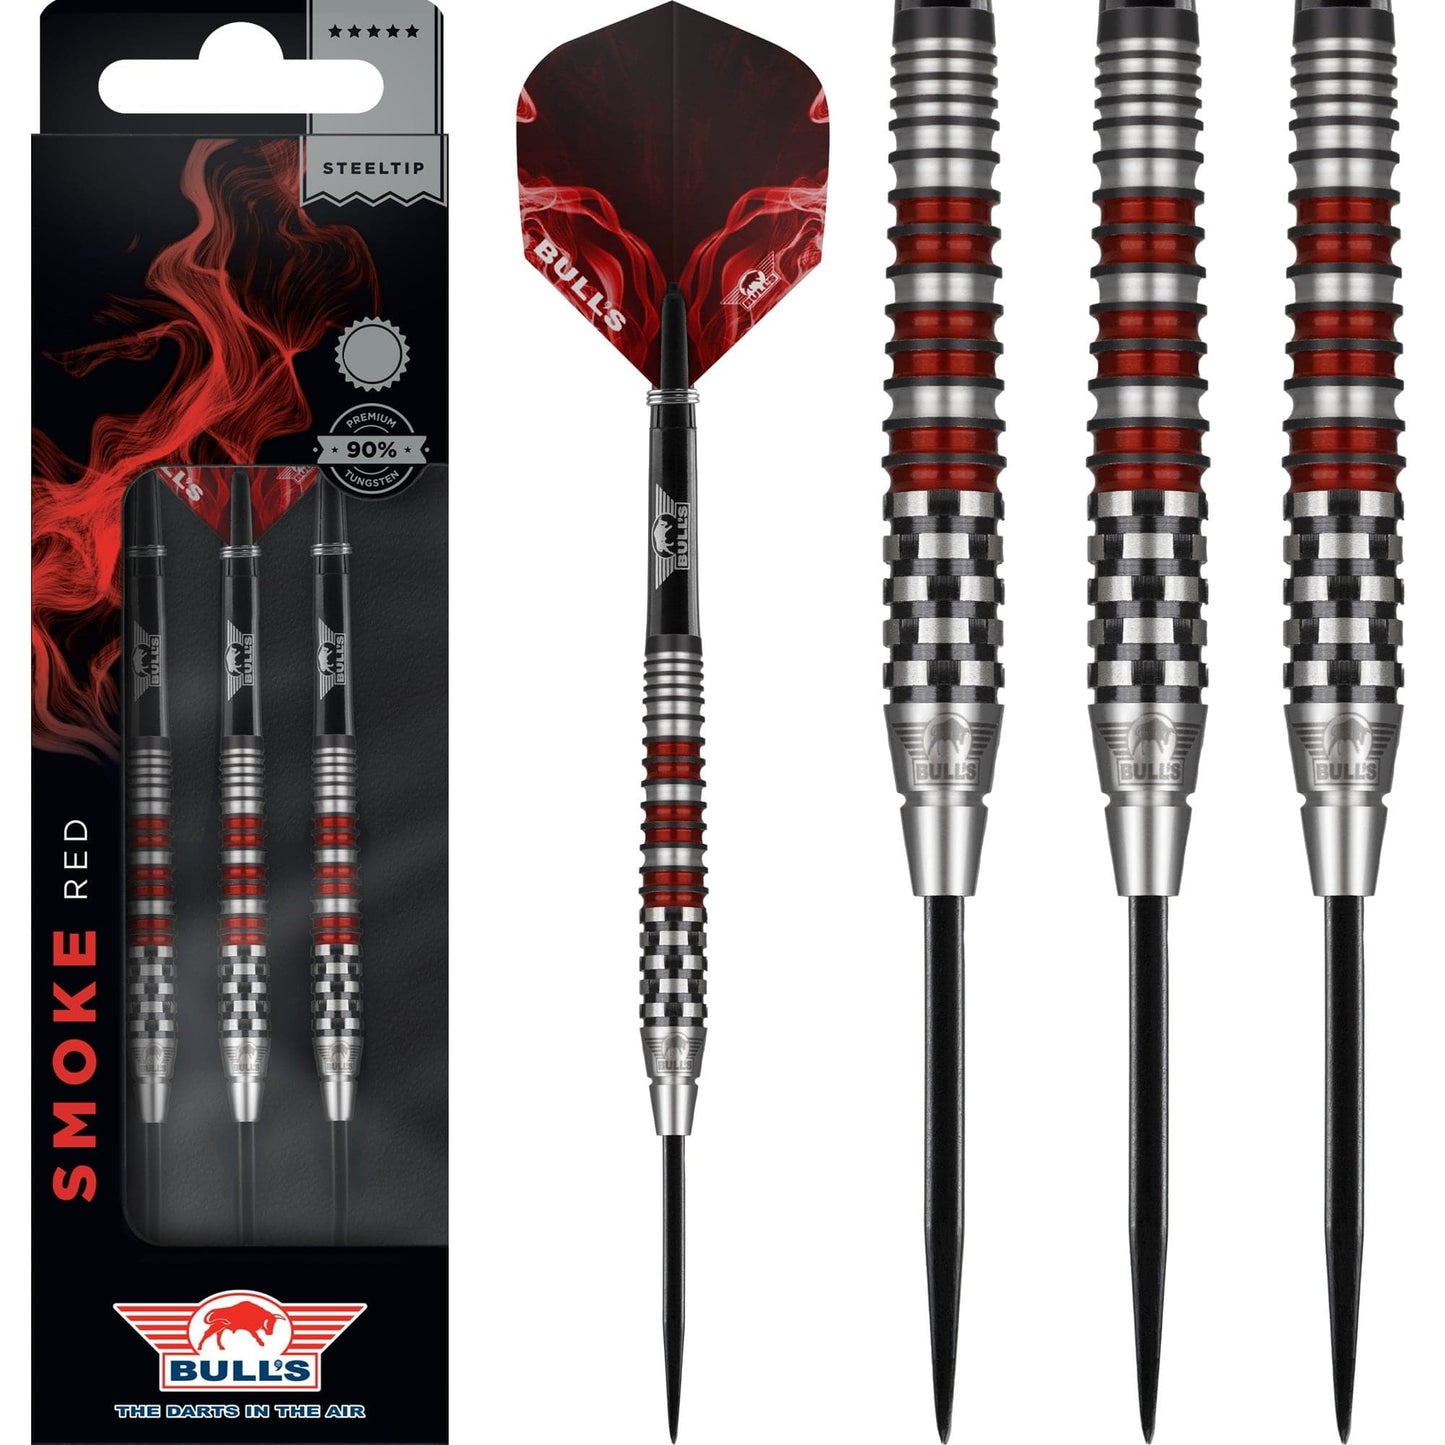 Bulls Smoke Darts - Steel Tip - Style A - Ringed - Black and Red 23g